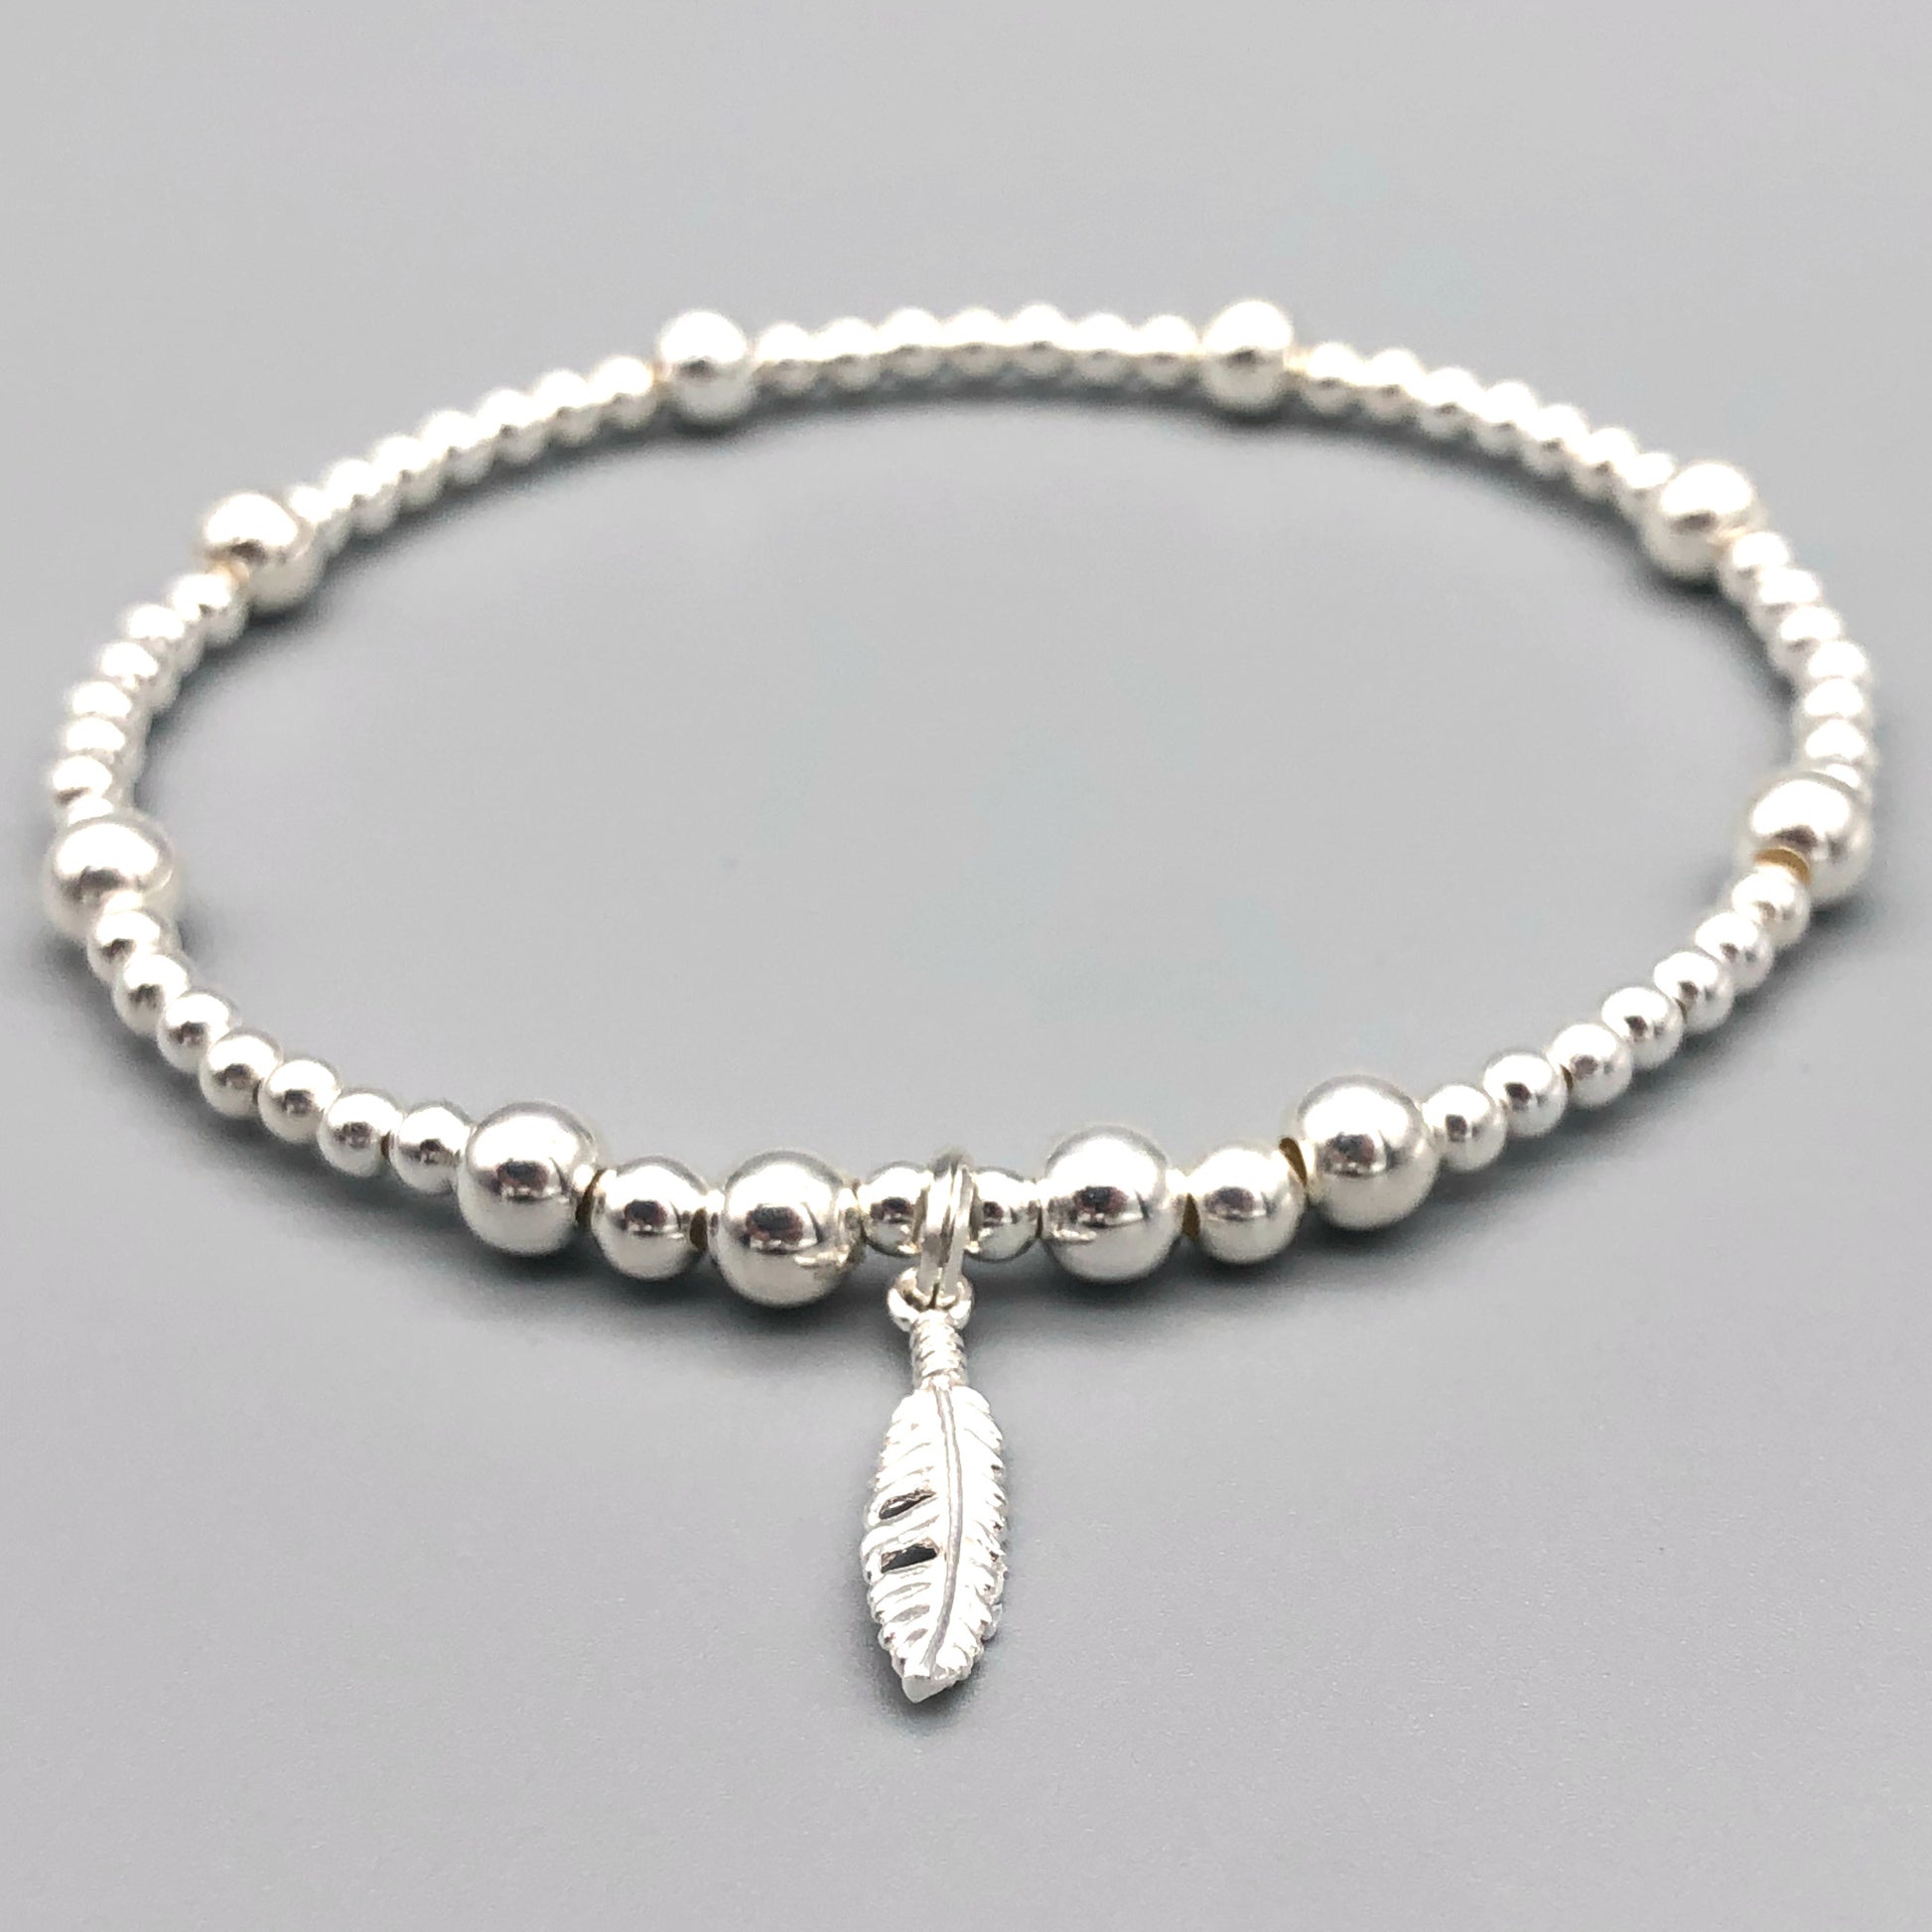 Feather charm girl's 925 sterling silver stacking bracelet by My Silver Wish